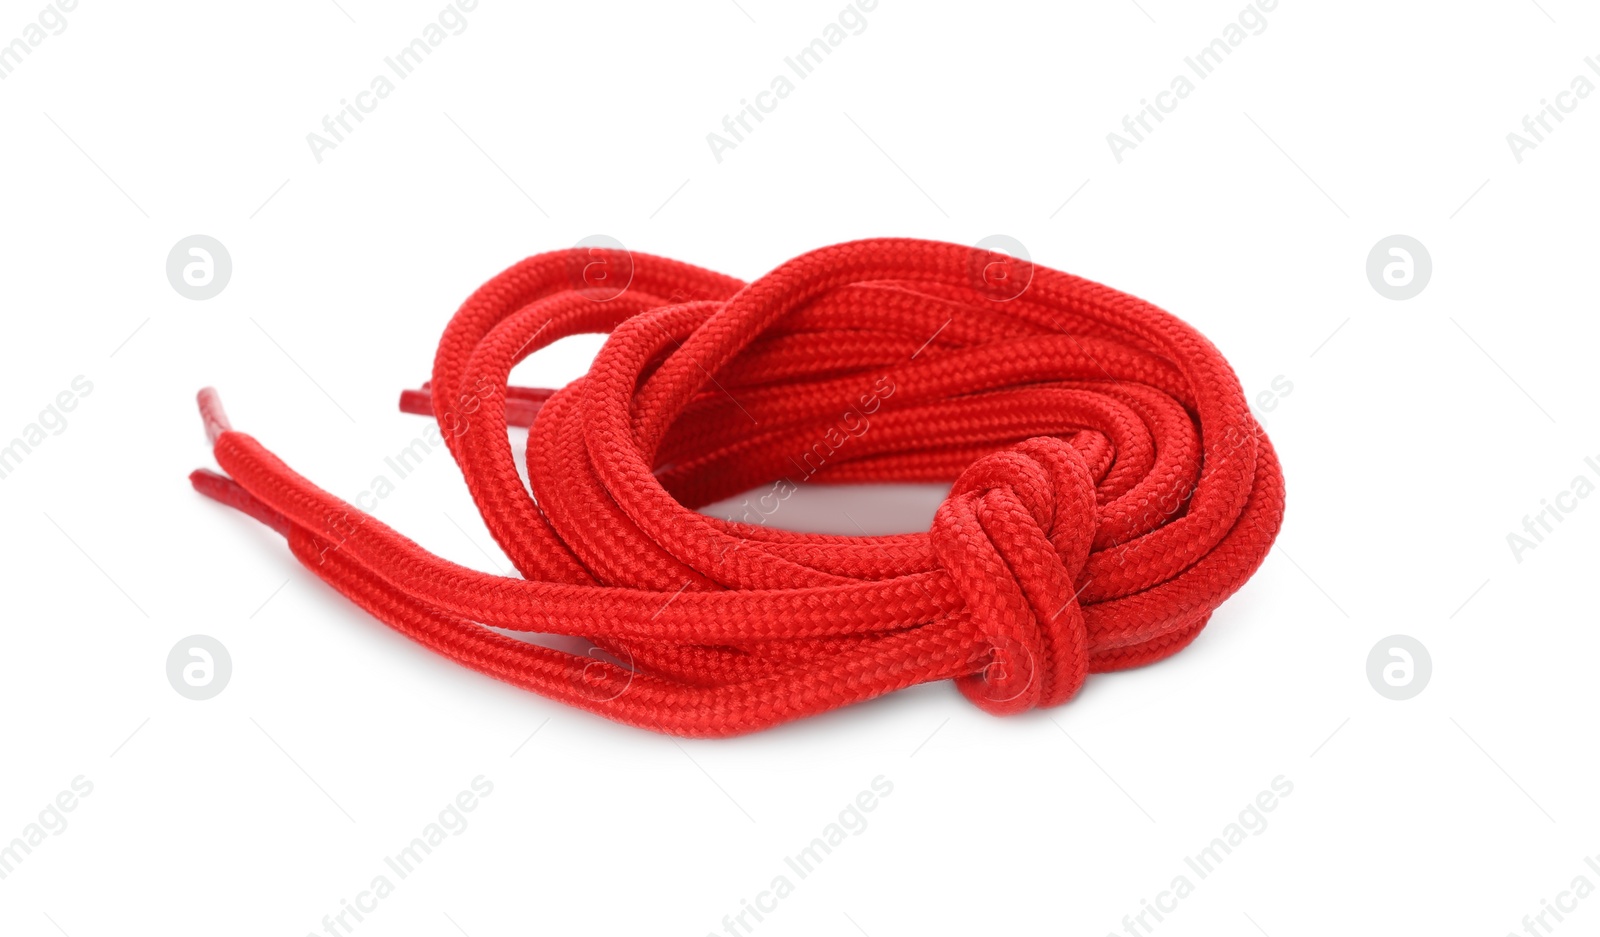 Photo of Red shoe laces tied in knot isolated on white